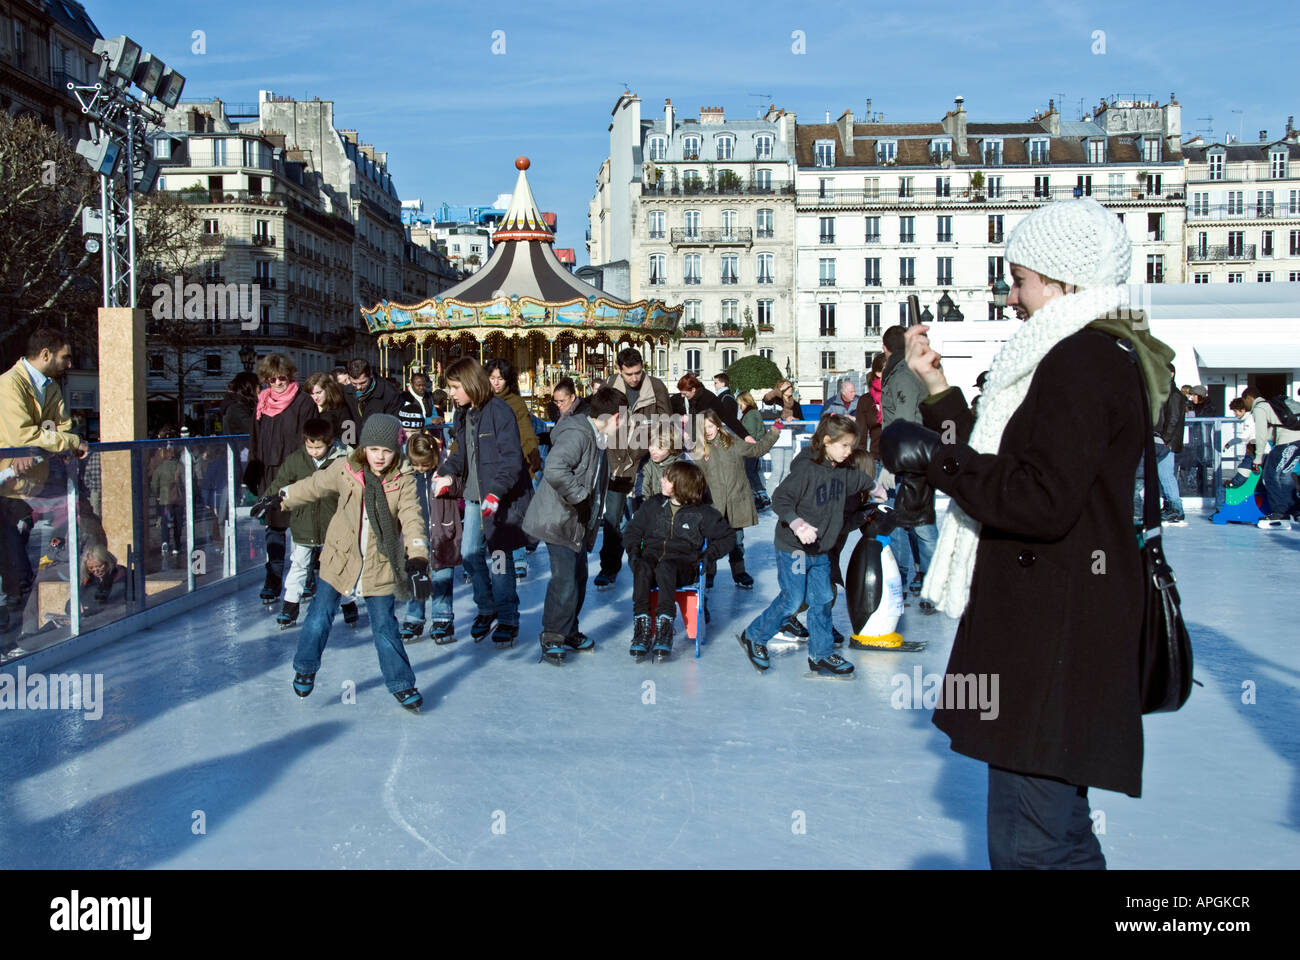 Paris France, Large Crowd People, Families Public Ice Skating on Street Skating Ring winter scenes, family sports Stock Photo